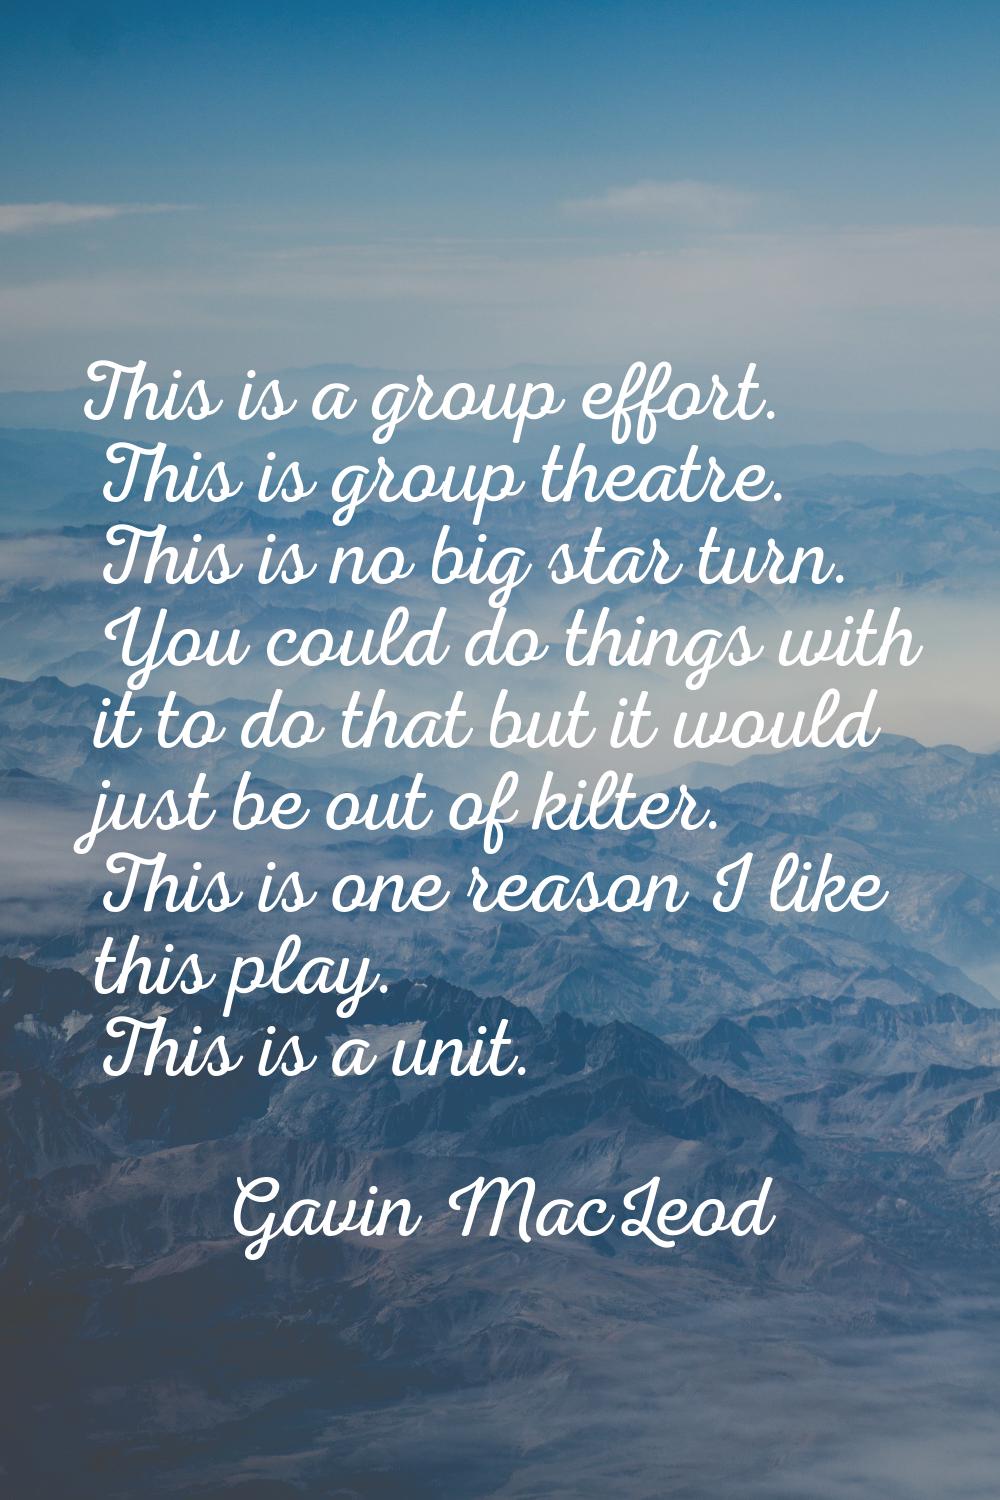 This is a group effort. This is group theatre. This is no big star turn. You could do things with i